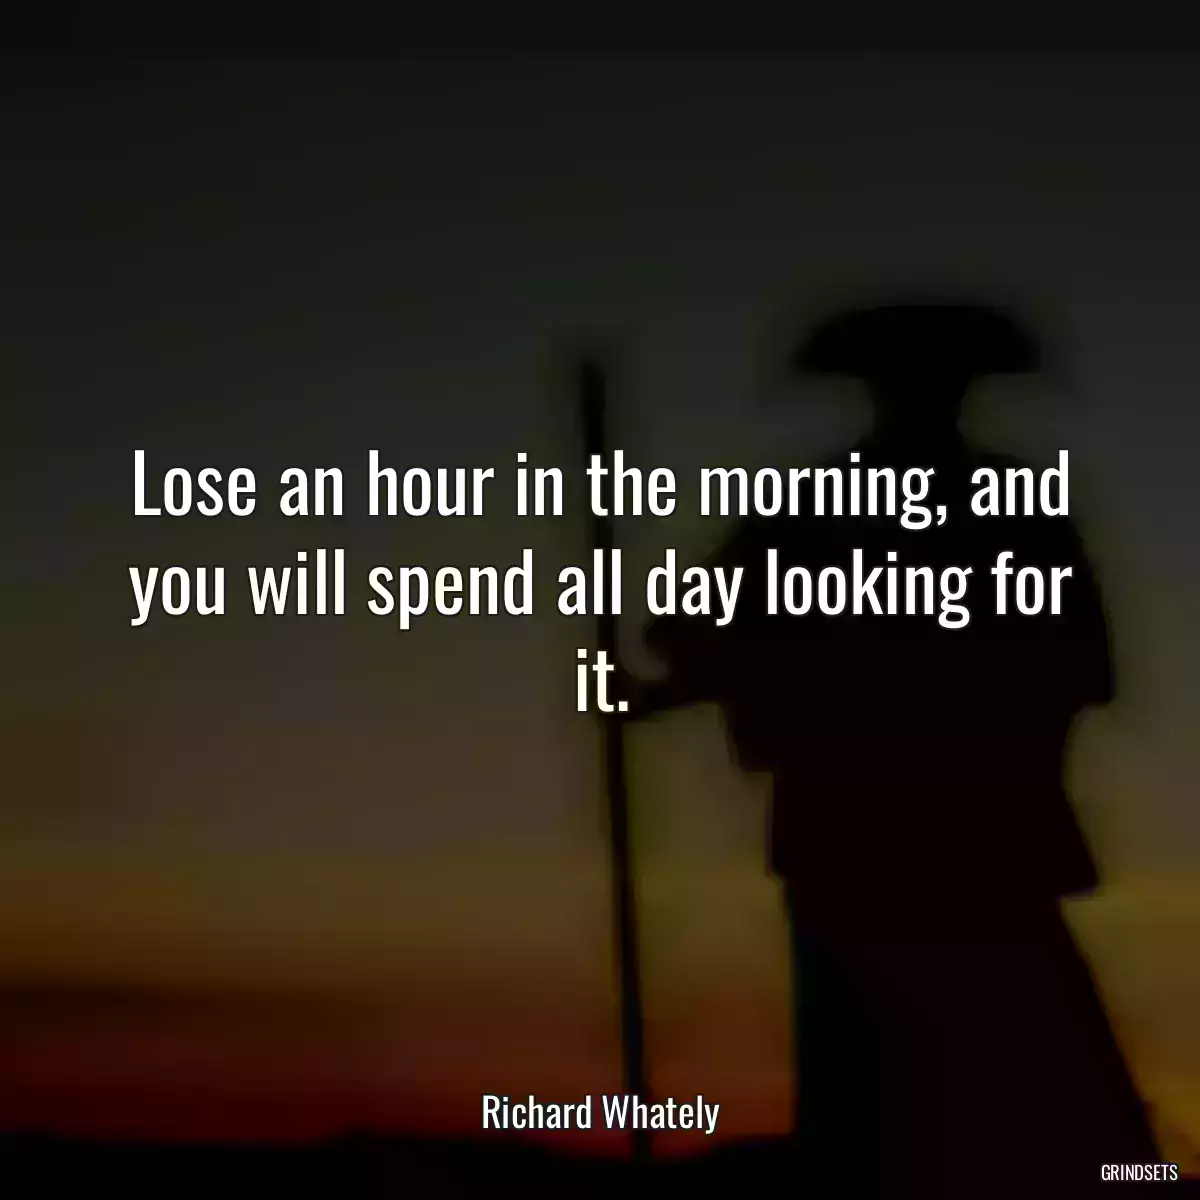 Lose an hour in the morning, and you will spend all day looking for it.